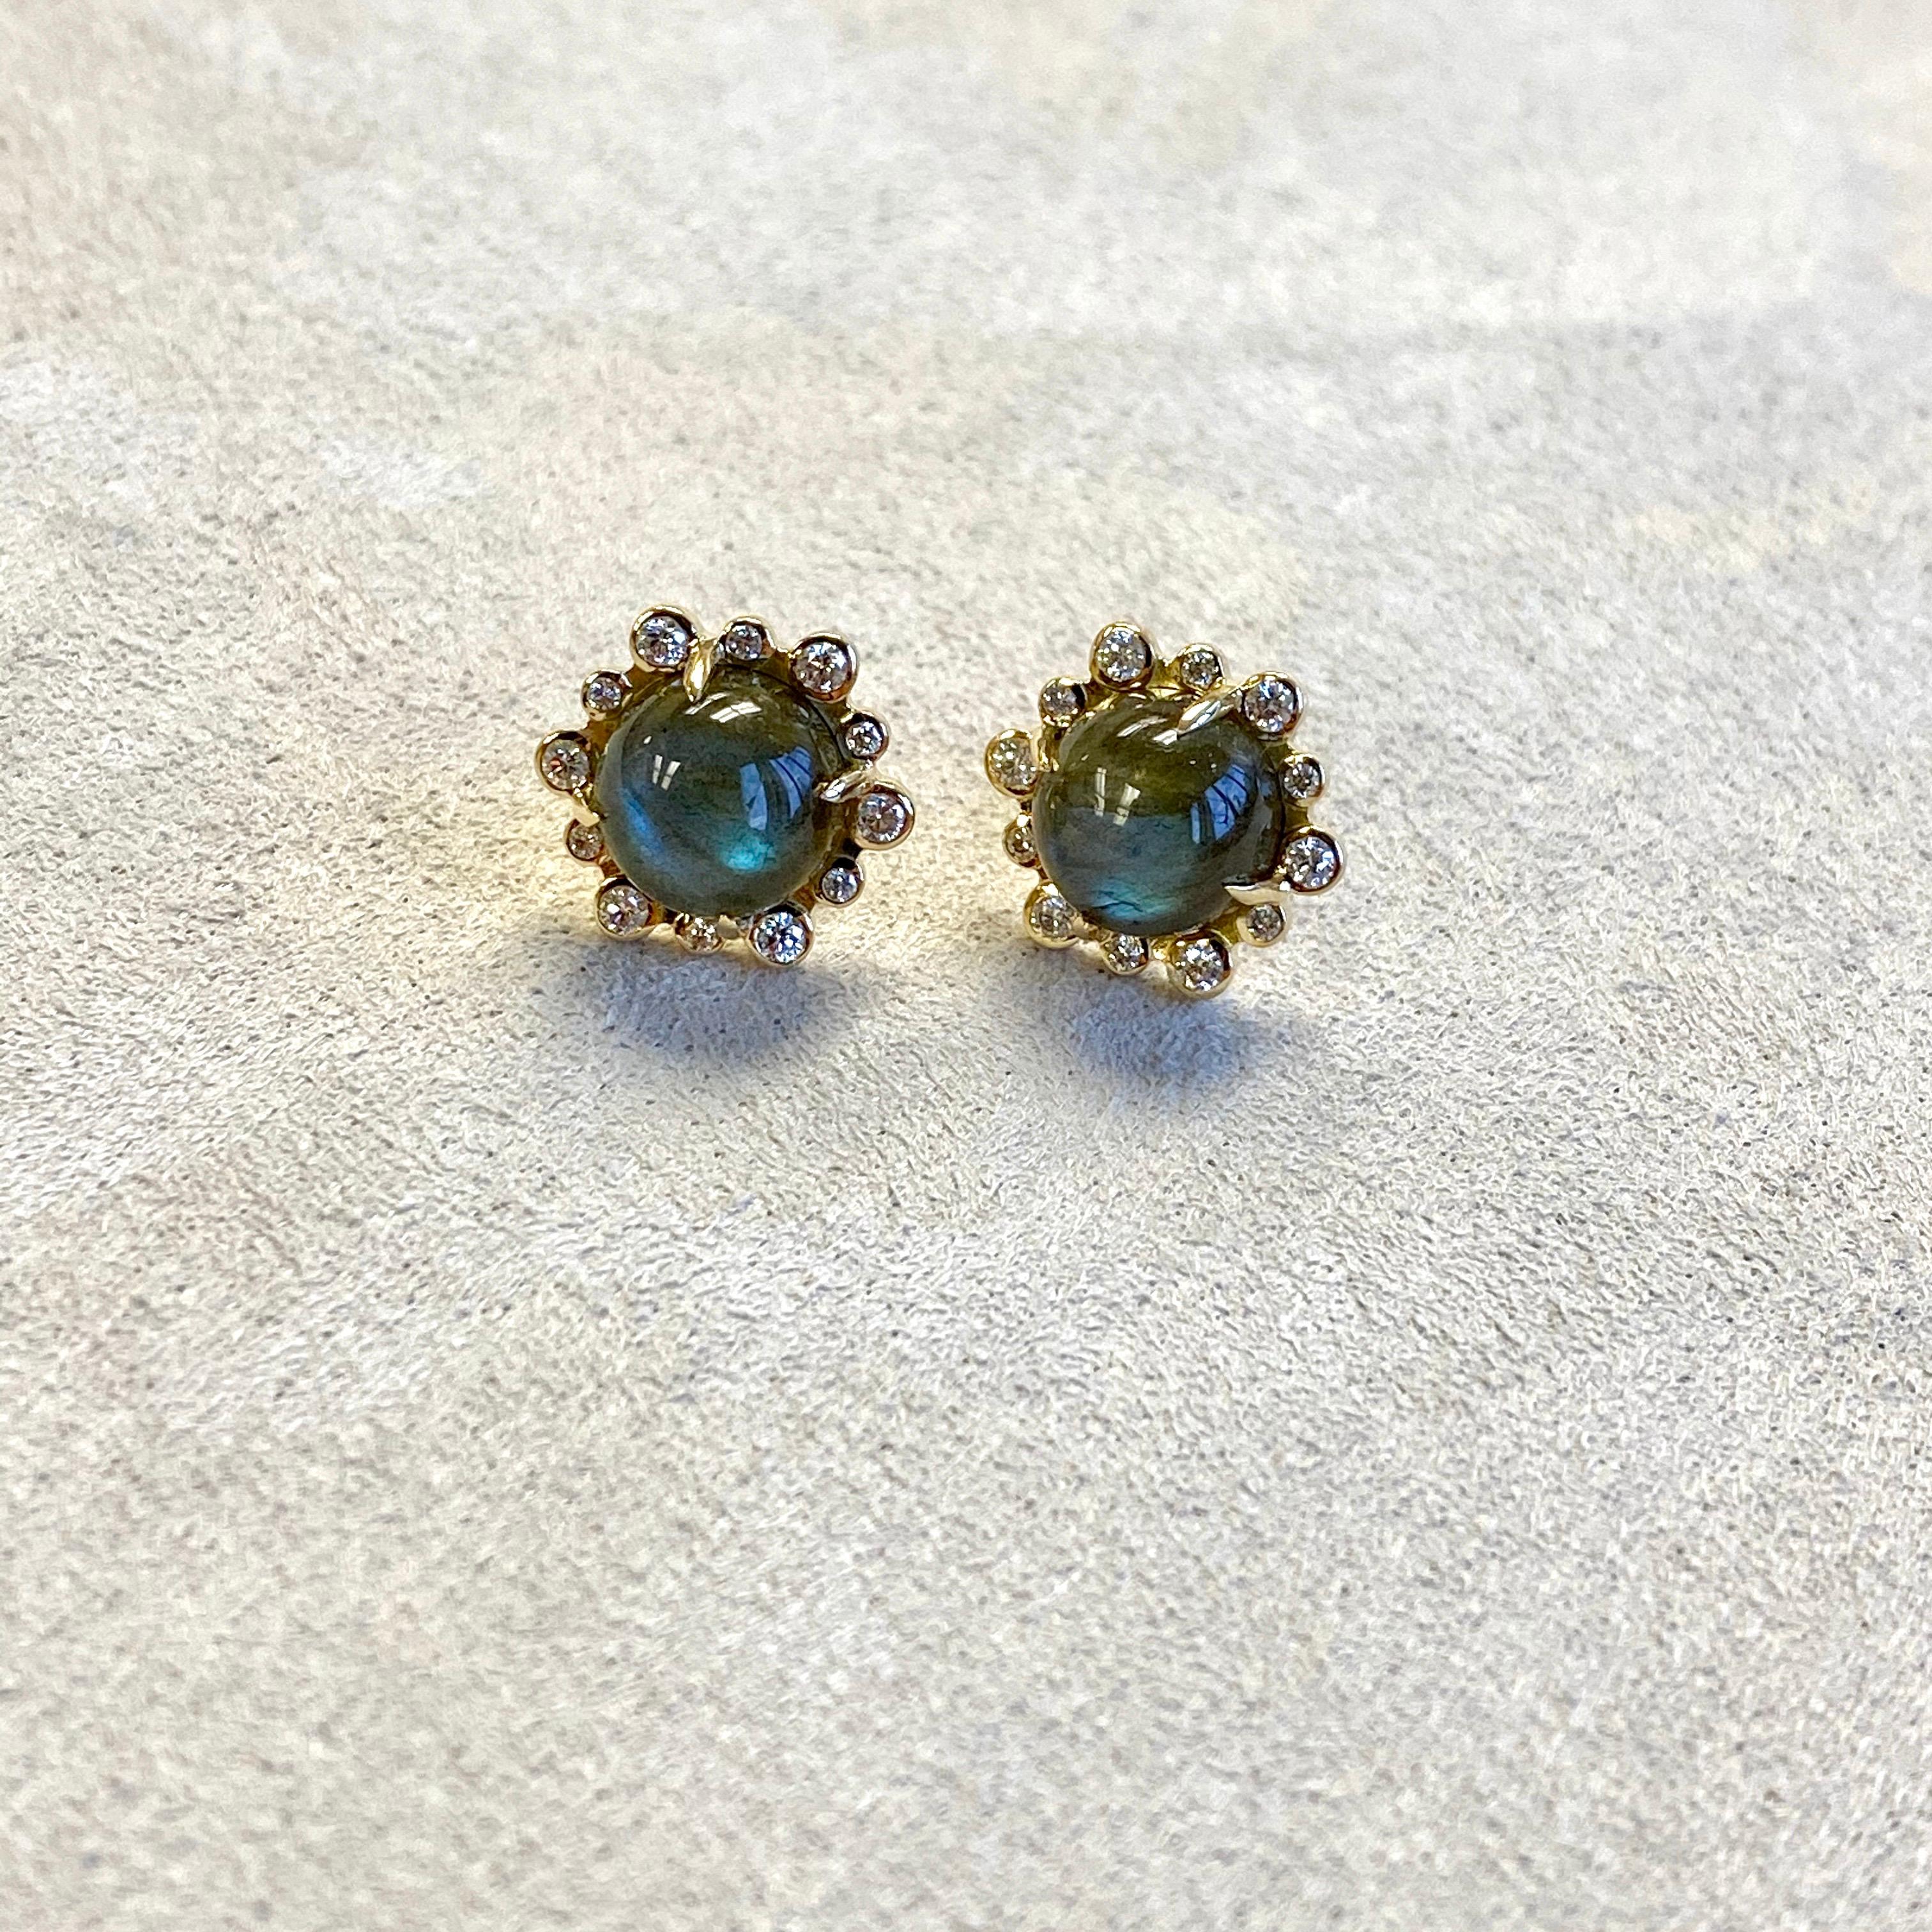 Created in 18 karat yellow gold
Labradorite 5 cts approx
Diamonds 0.28 ct approx
Limited edition

Elevate your style with these limited-edition Candy Blue Topaz and Moon Quartz Earrings, exquisitely crafted in 18 karat yellow gold. The opulent